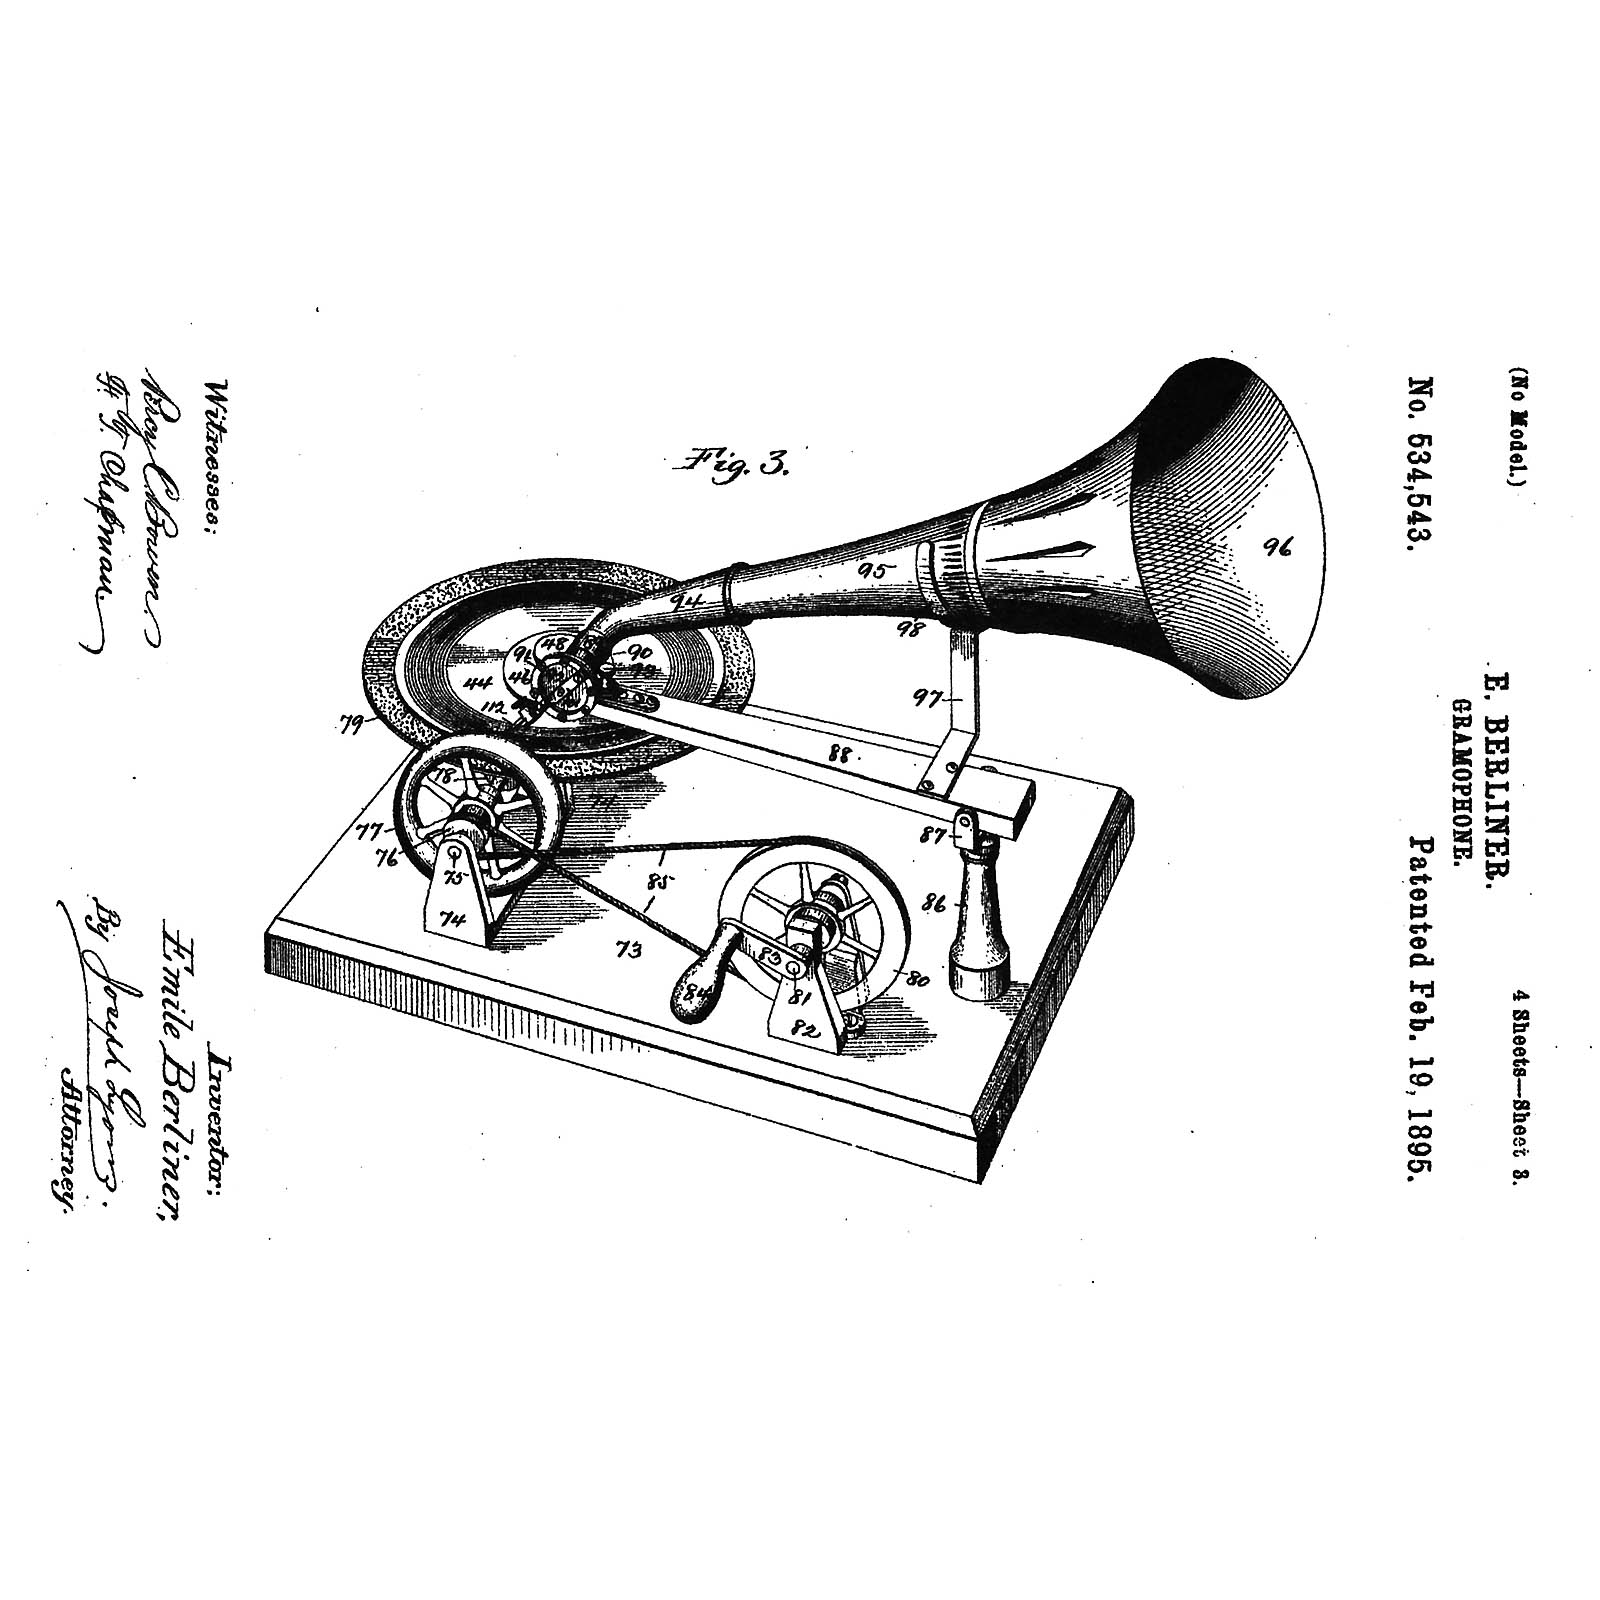 Rare Original Gramophone by Emile Berliner, 1890 onwards
First series of production by Grammophon- - Image 6 of 15